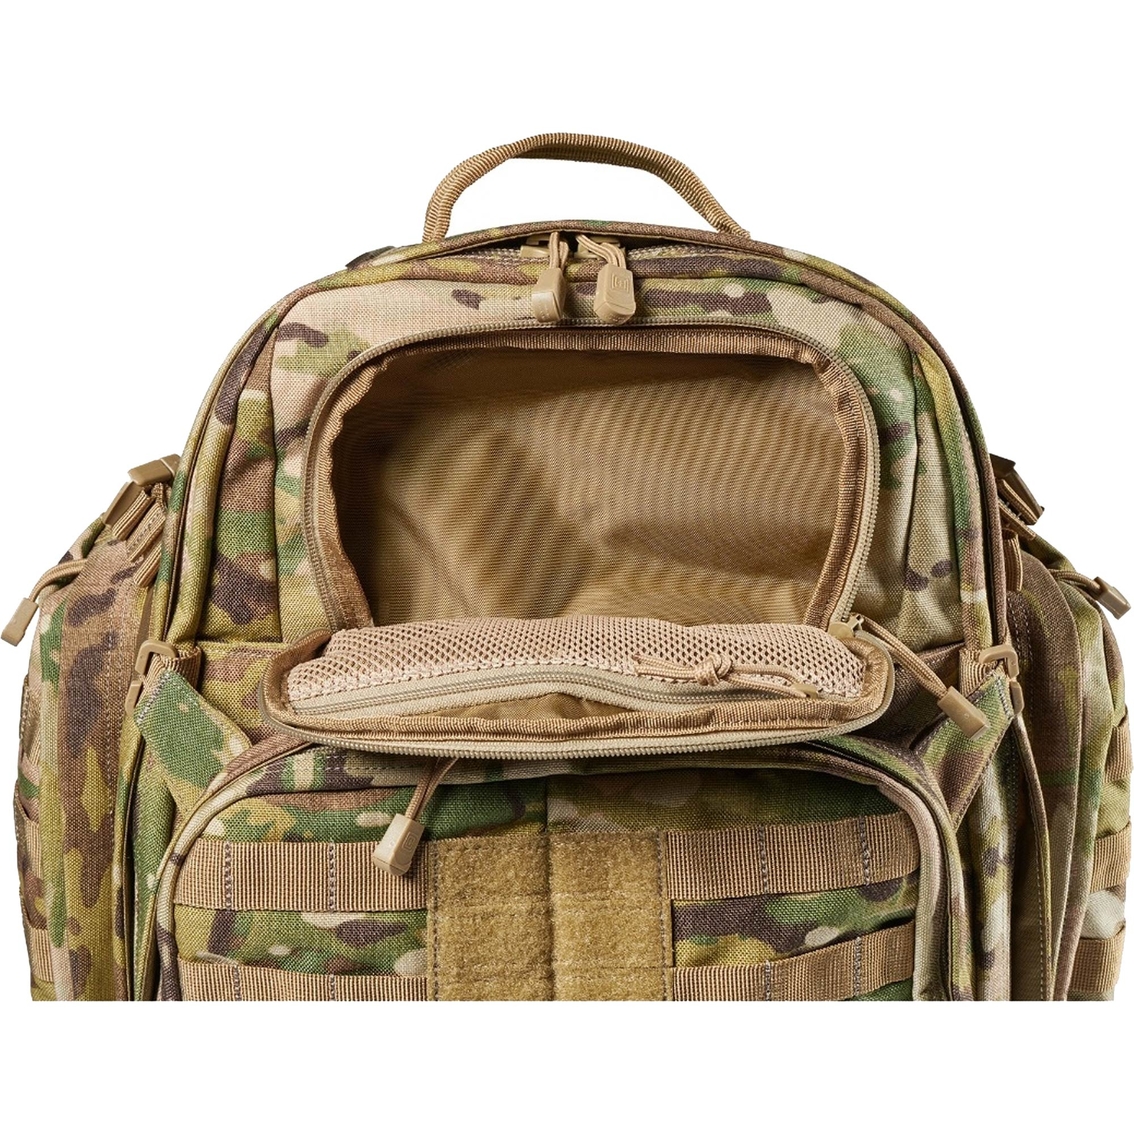 5.11 RUSH 72 2.0 Backpack - Image 10 of 10